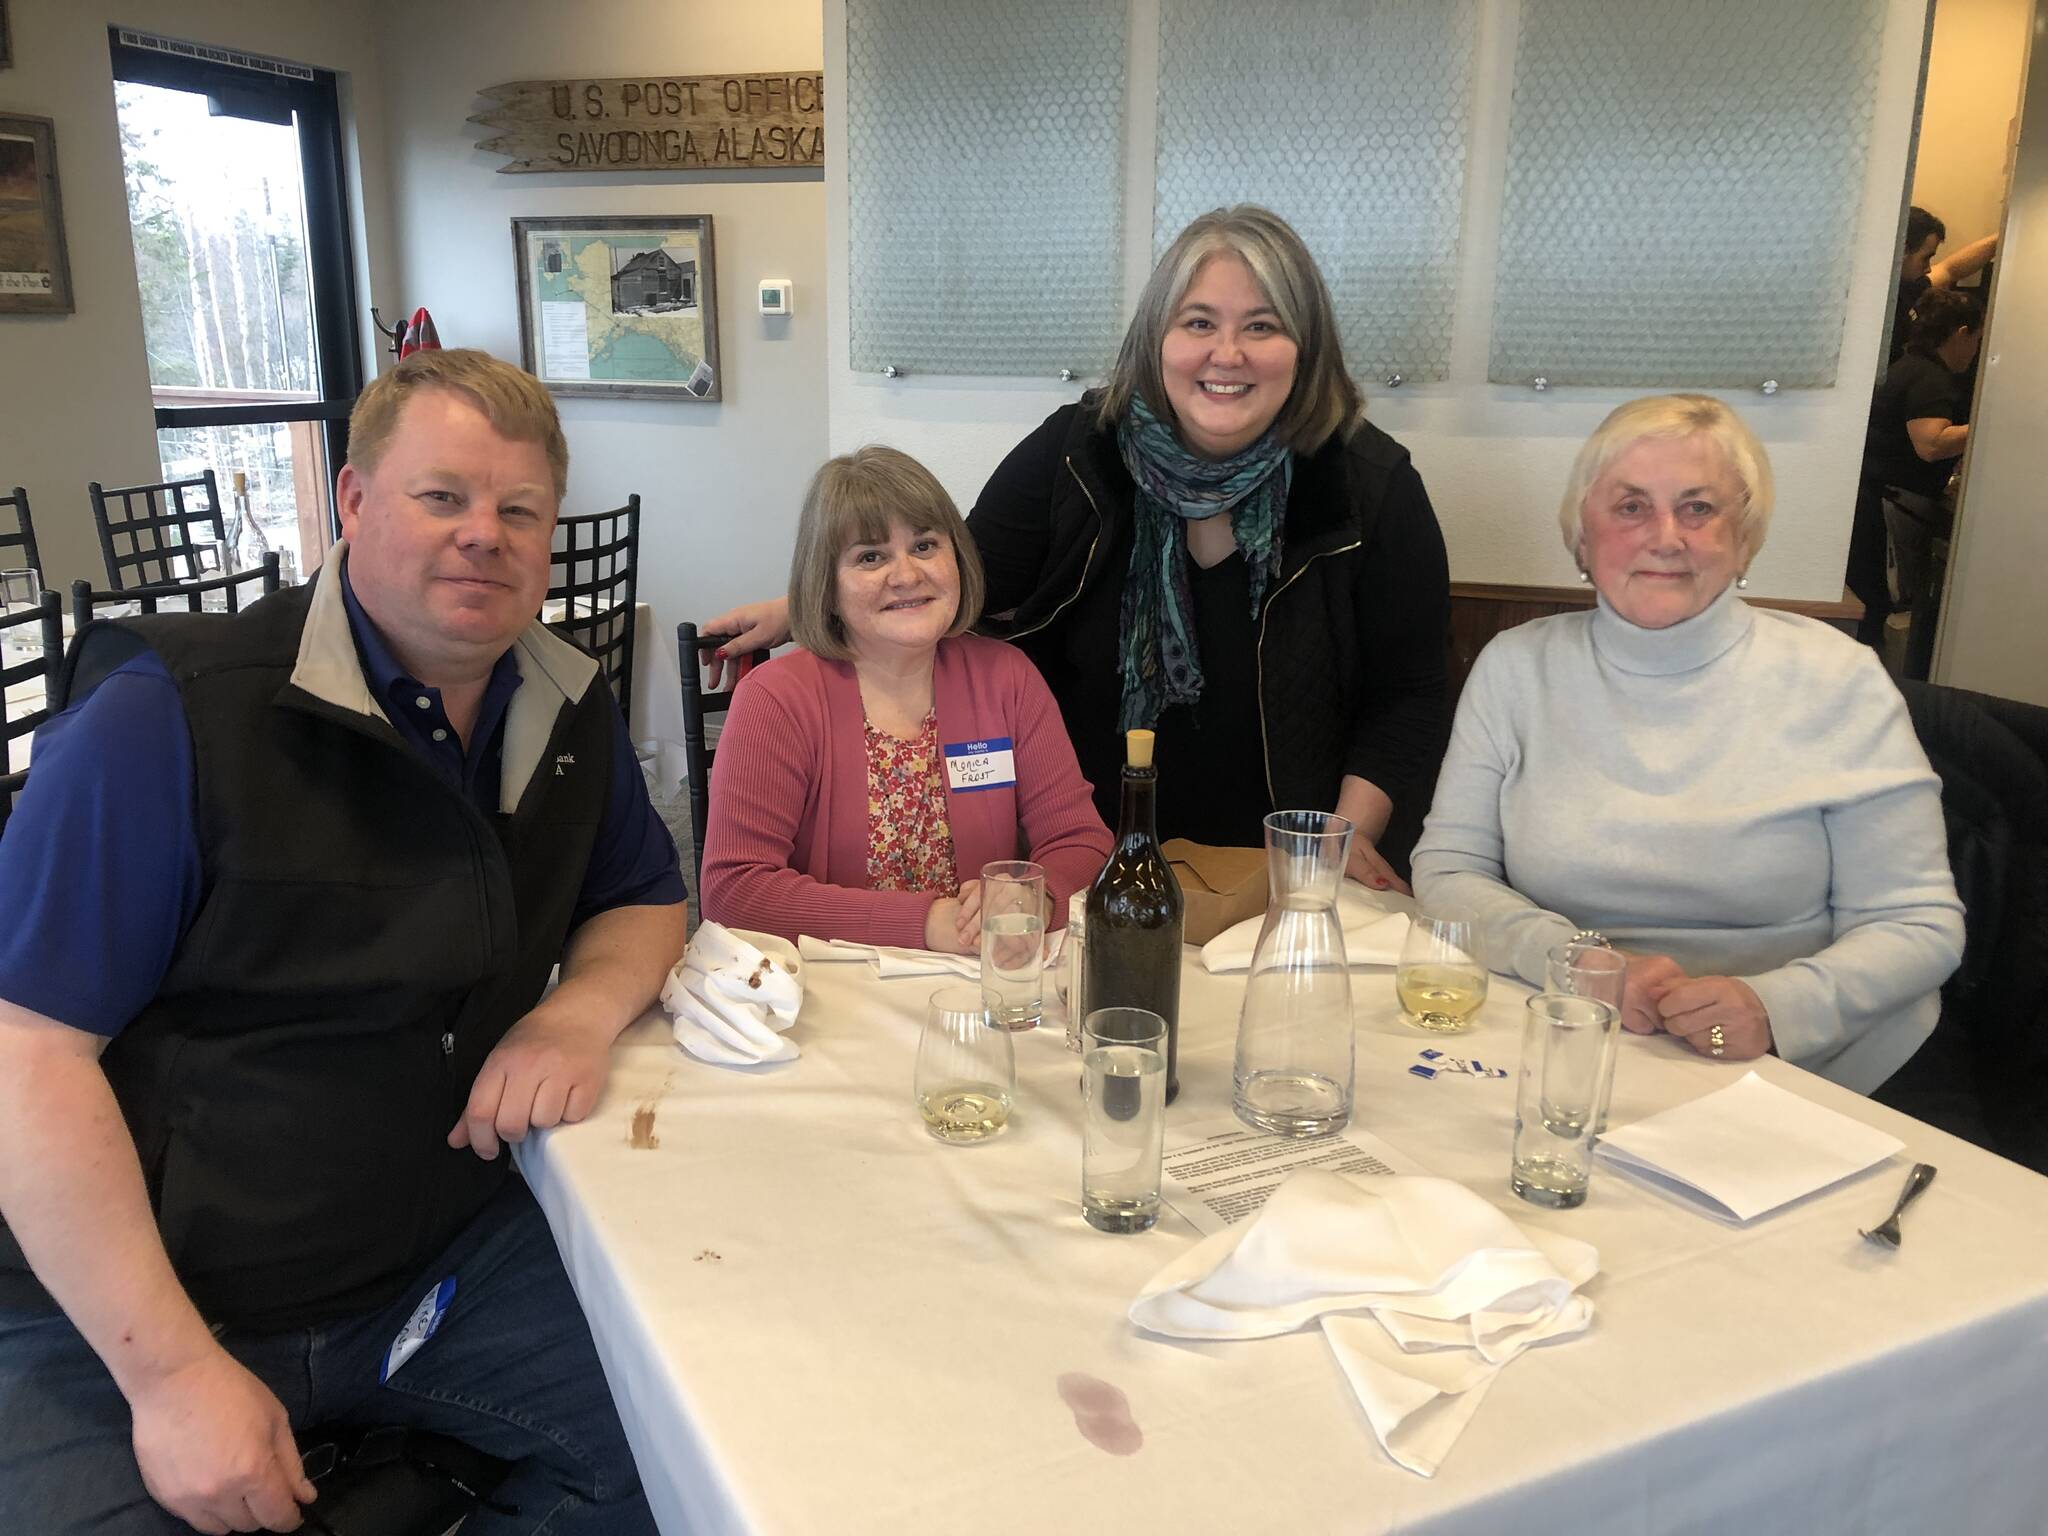 (From left) Mike Frost, Monica Frost, Tara Sweeney and Sue Carter attend a campaign meet and greet at Addie Camp on Saturday, April 16, 2022 in Soldotna, Alaska. Sweeney is running to fill the seat of former U.S. House Rep. Don Young, who died in March. (Photo courtesy Karina Waller)